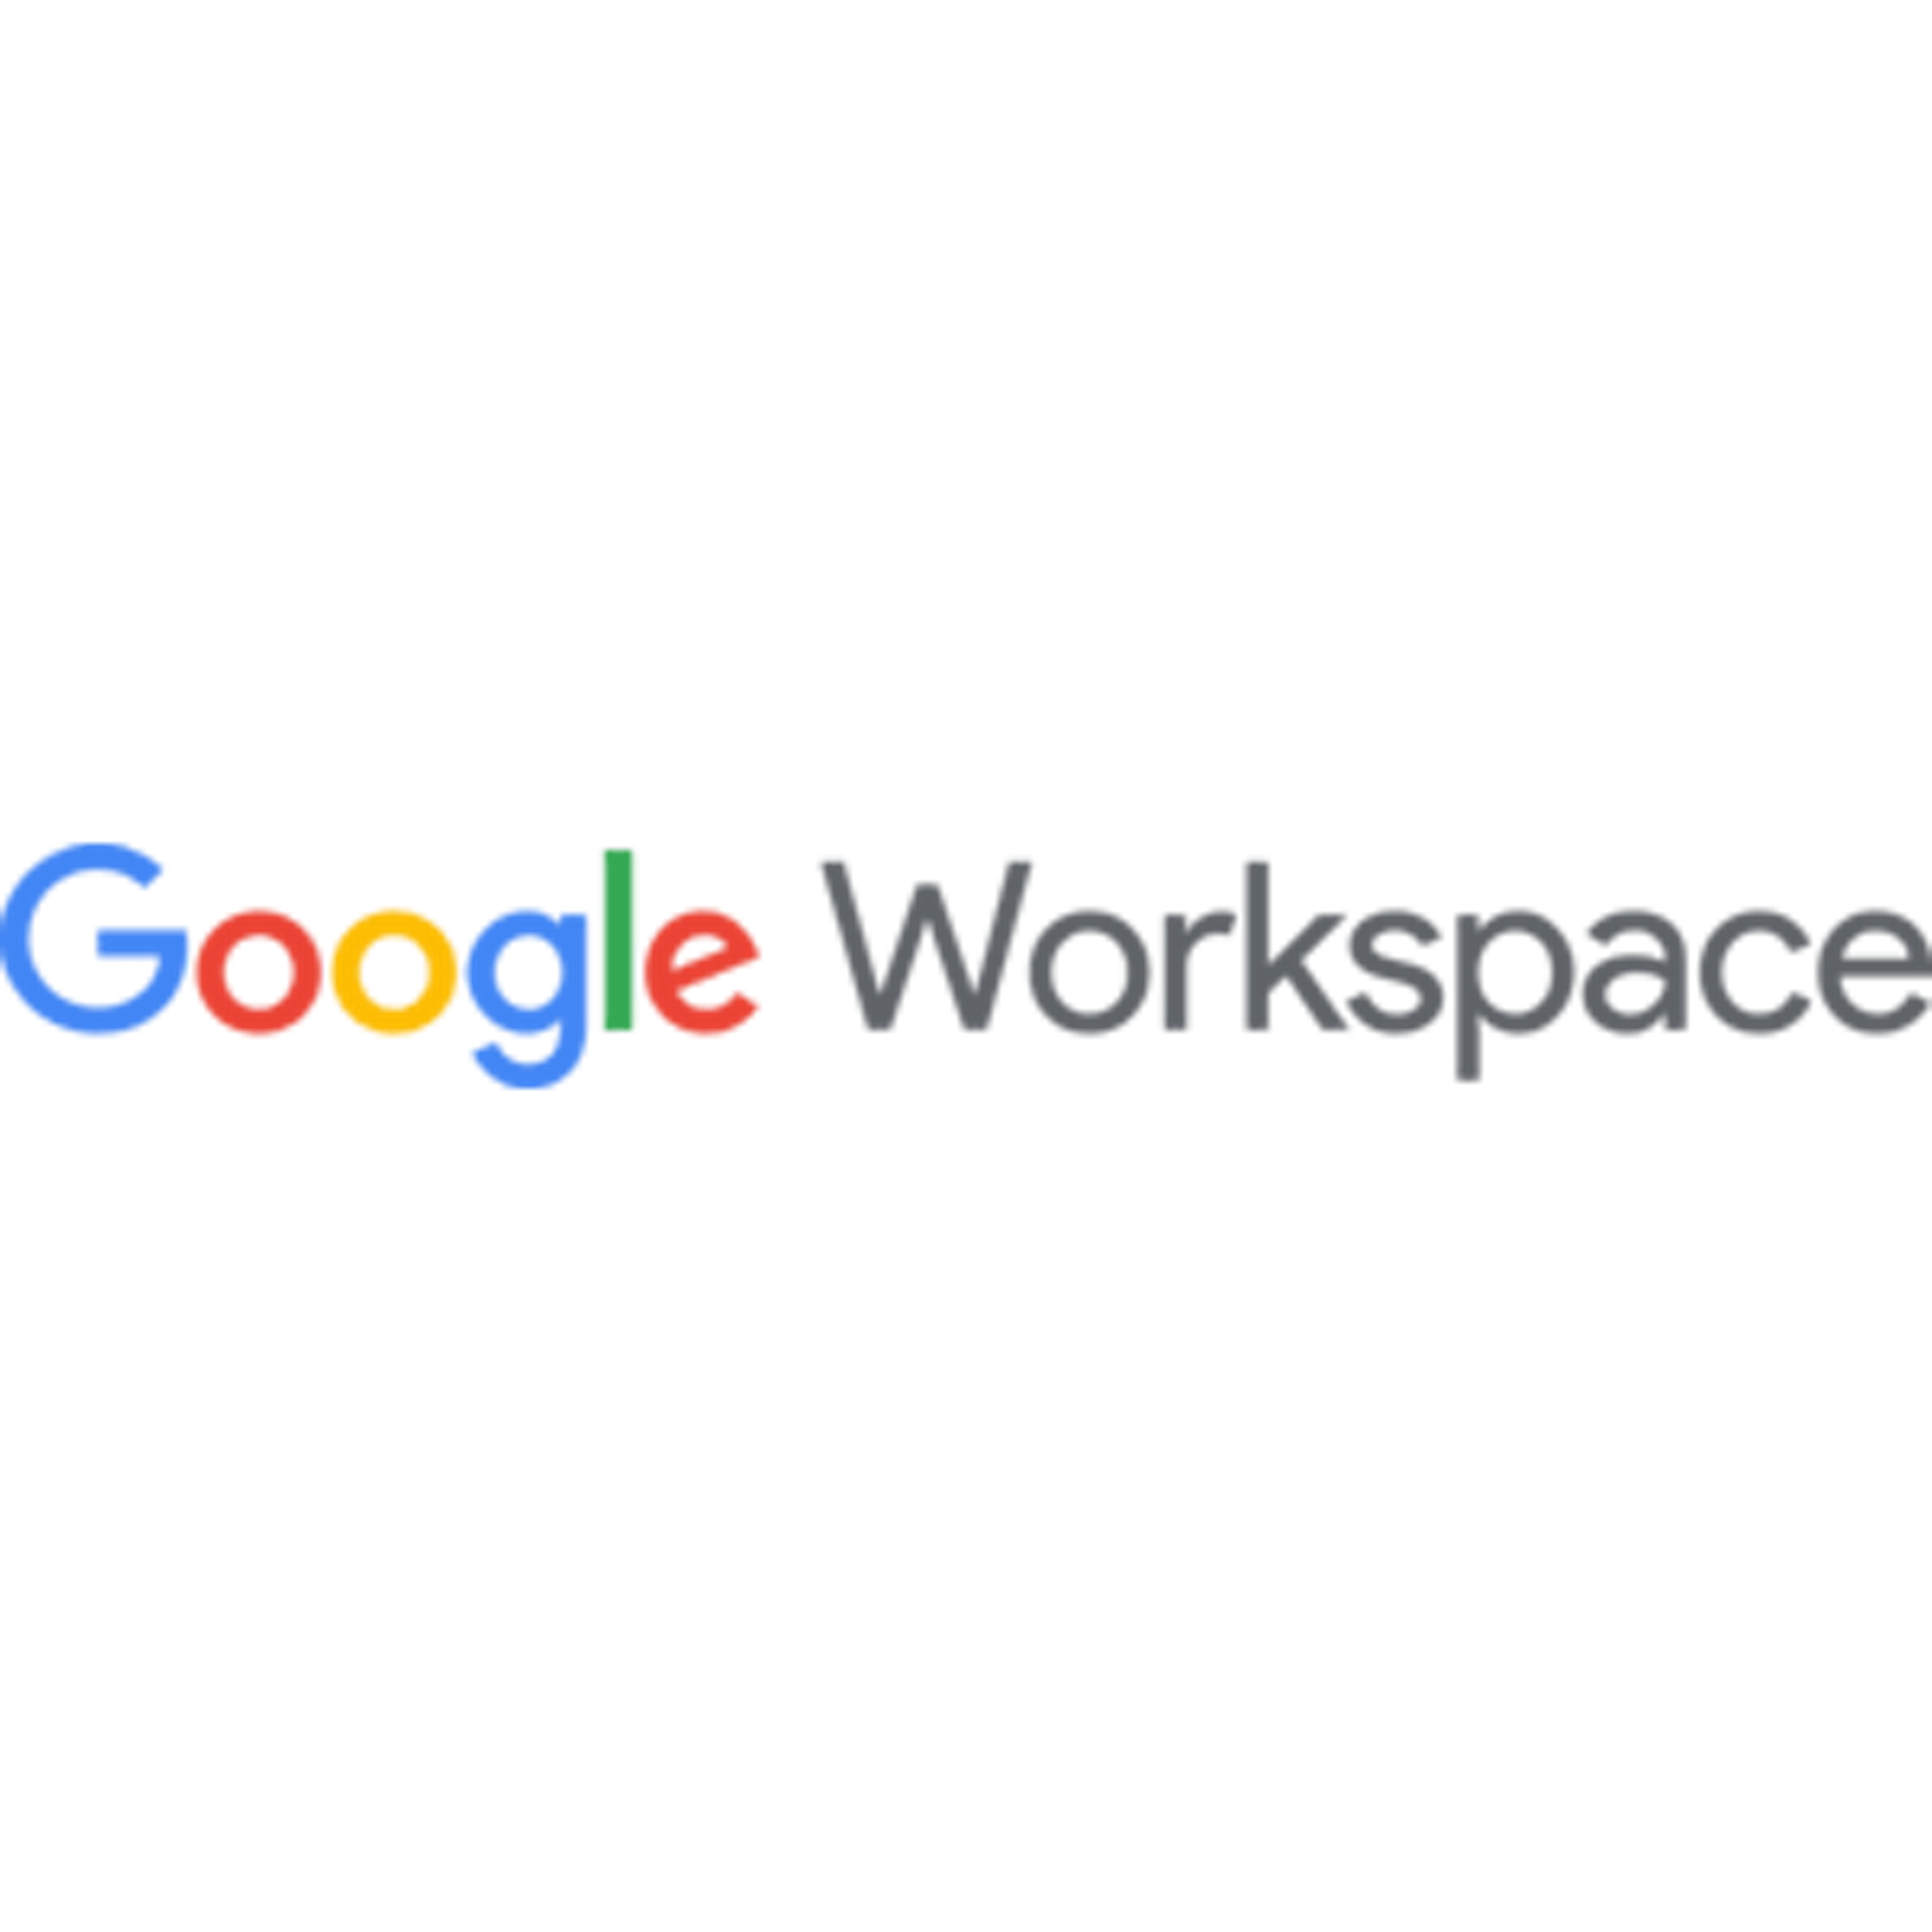 Iron Cove Solutions | Cloud Consulting Firm | Google Workspace |300-new-Google Workspace Logo